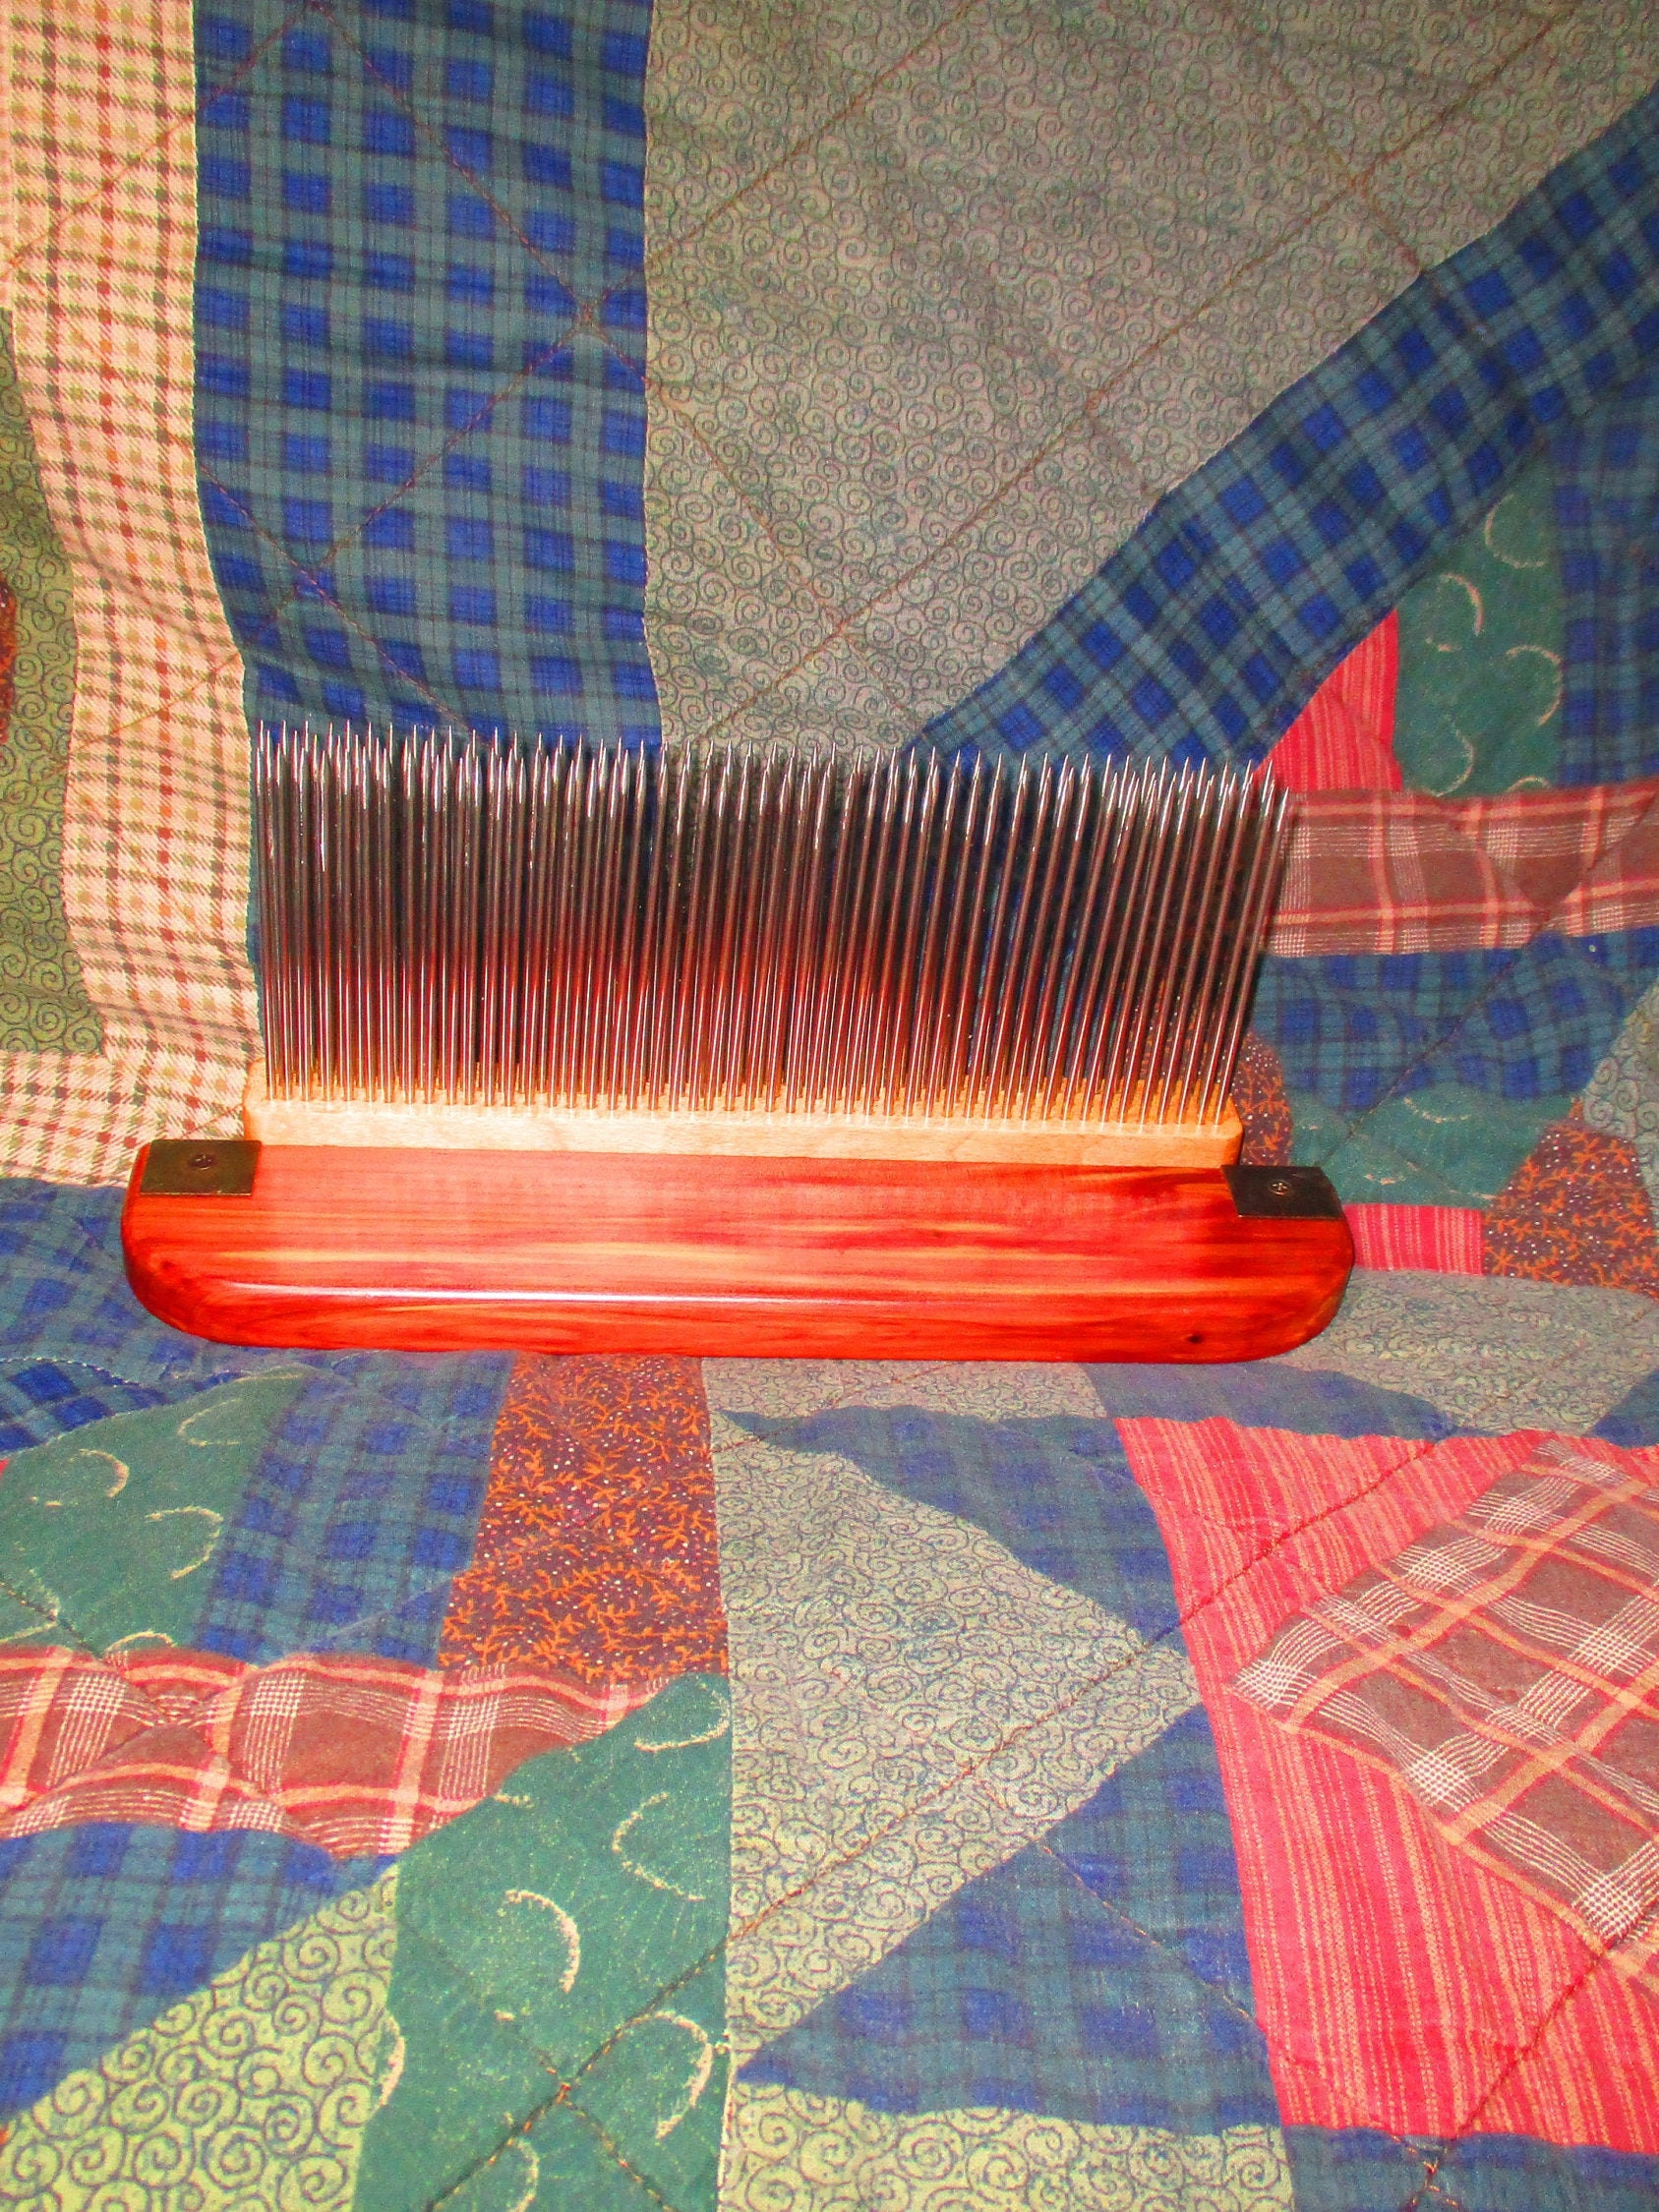 Comb and Hackle Kit - Smooth Points - Diz and Tine Straightener Includ –  Bam Fiber Works